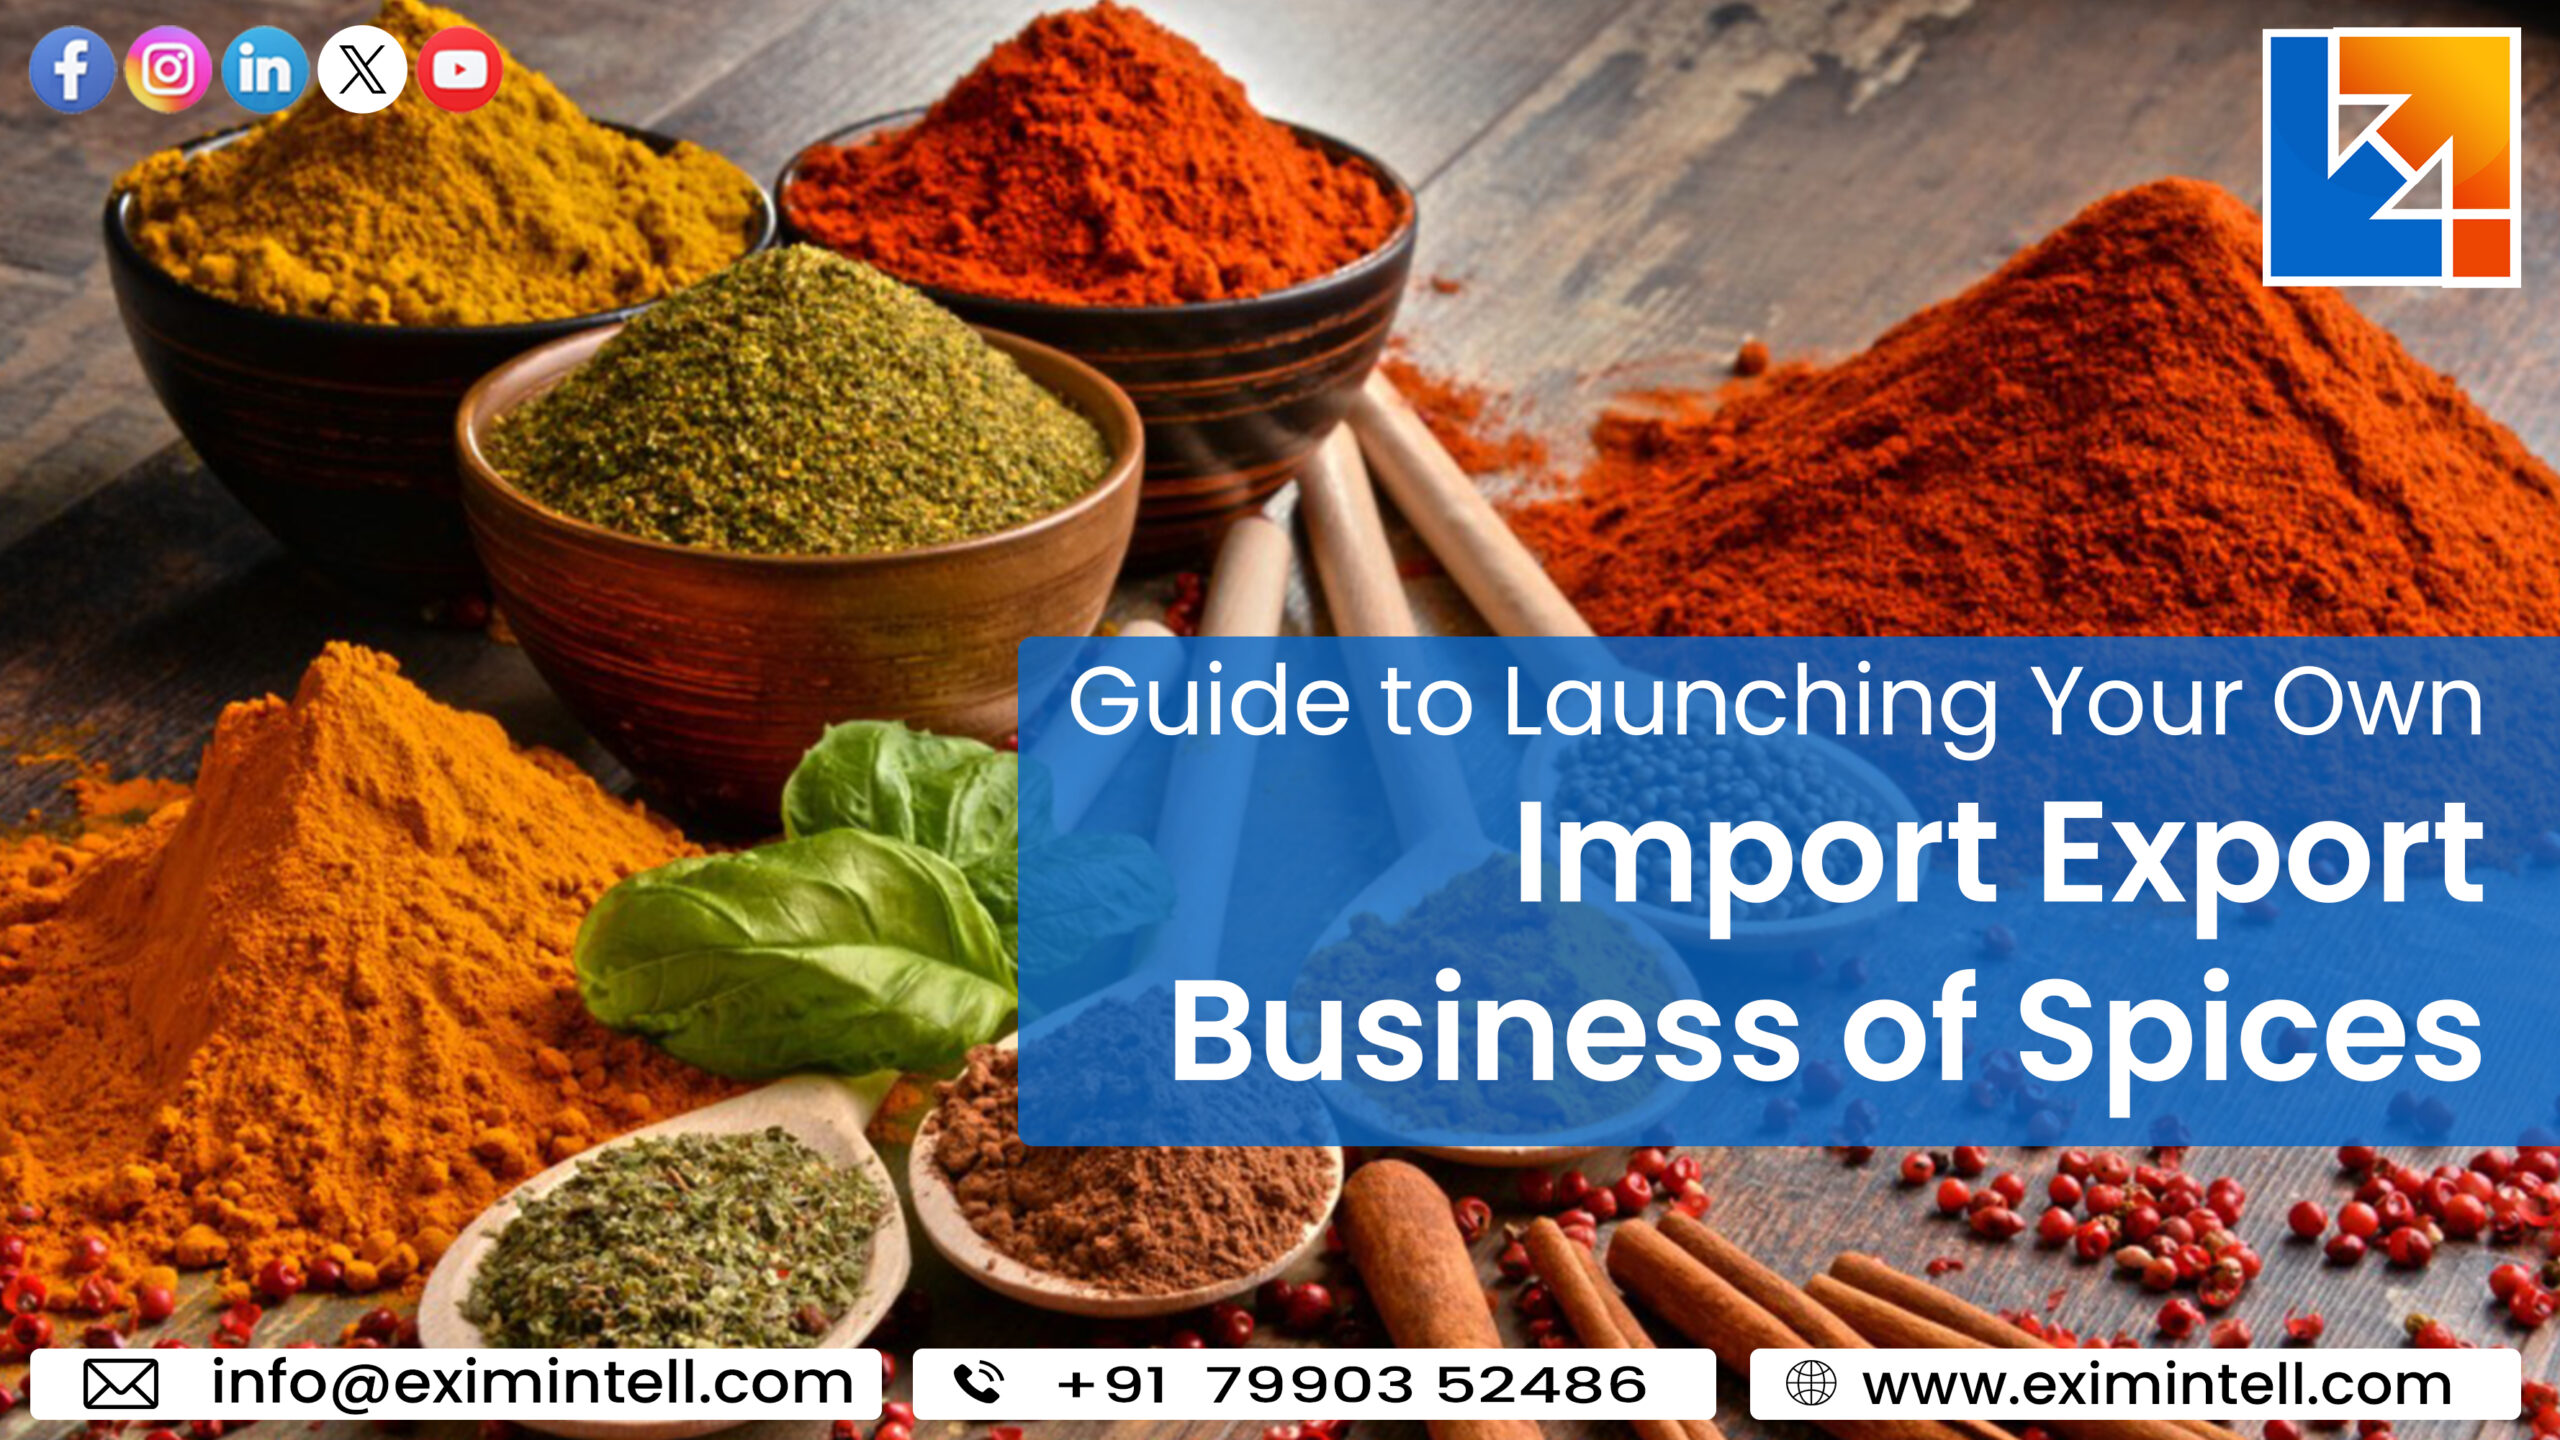 Guide to Launching Your Own Import-Export Business of Spices